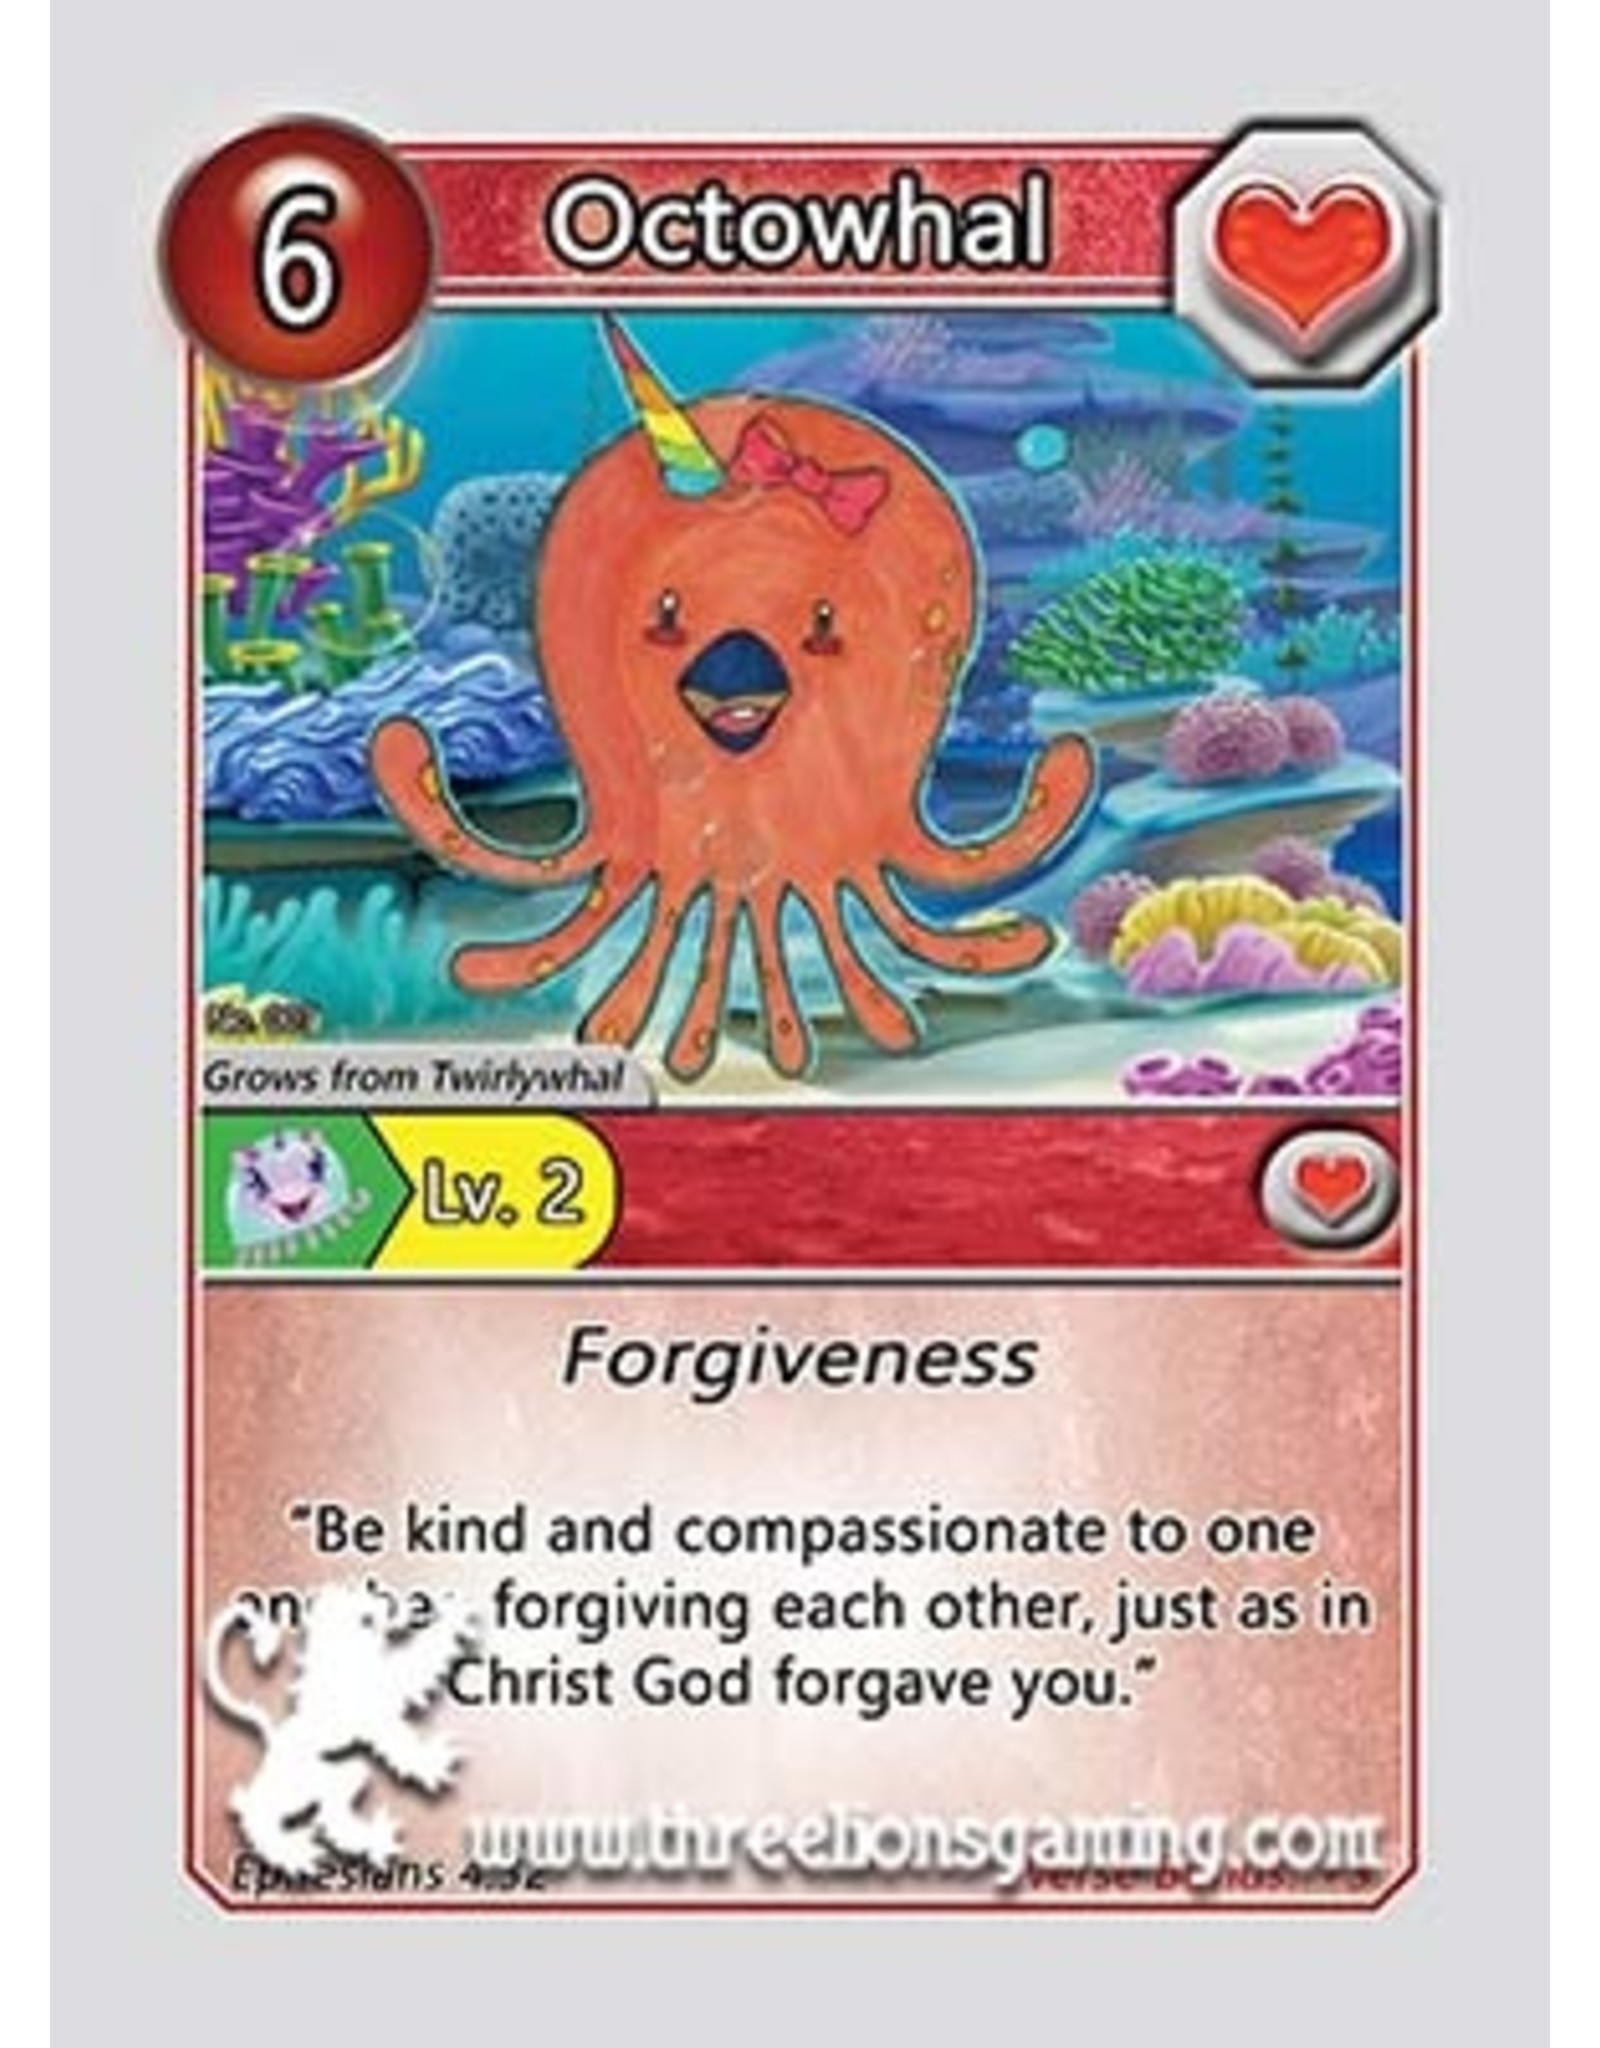 S1: Octowhal